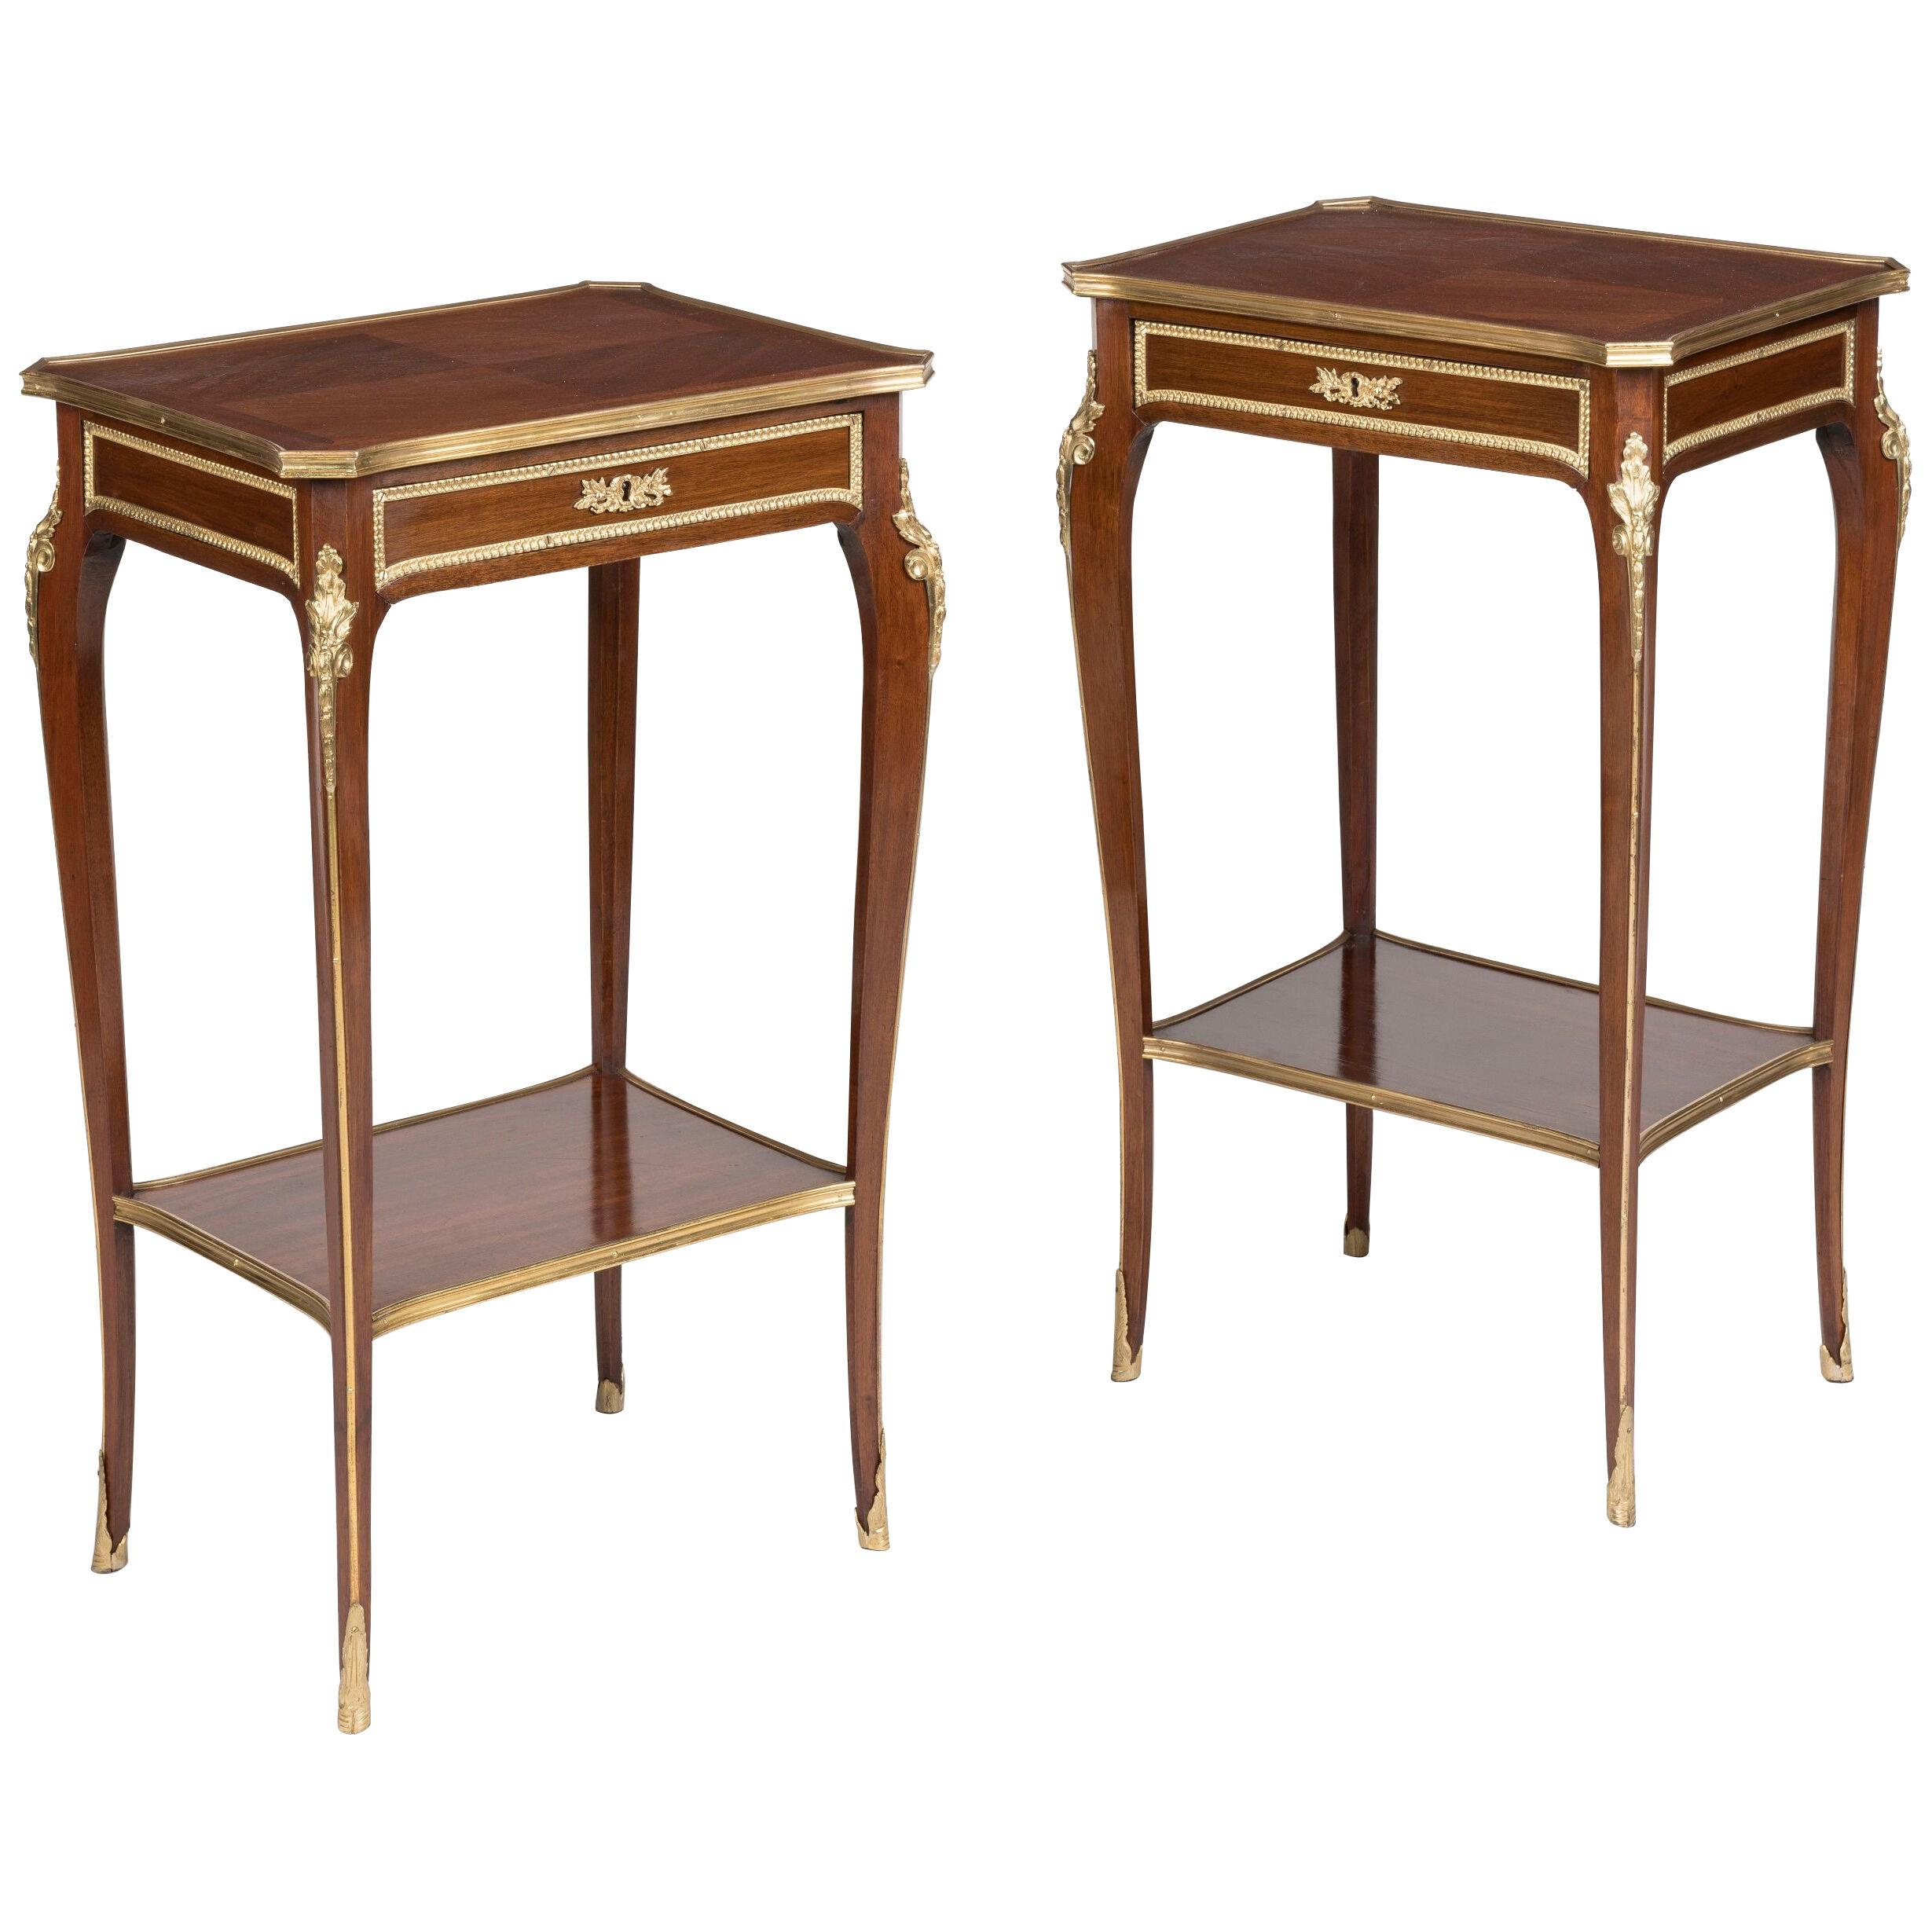 Pair of Mahogany Louis XVI Style Occasional Tables